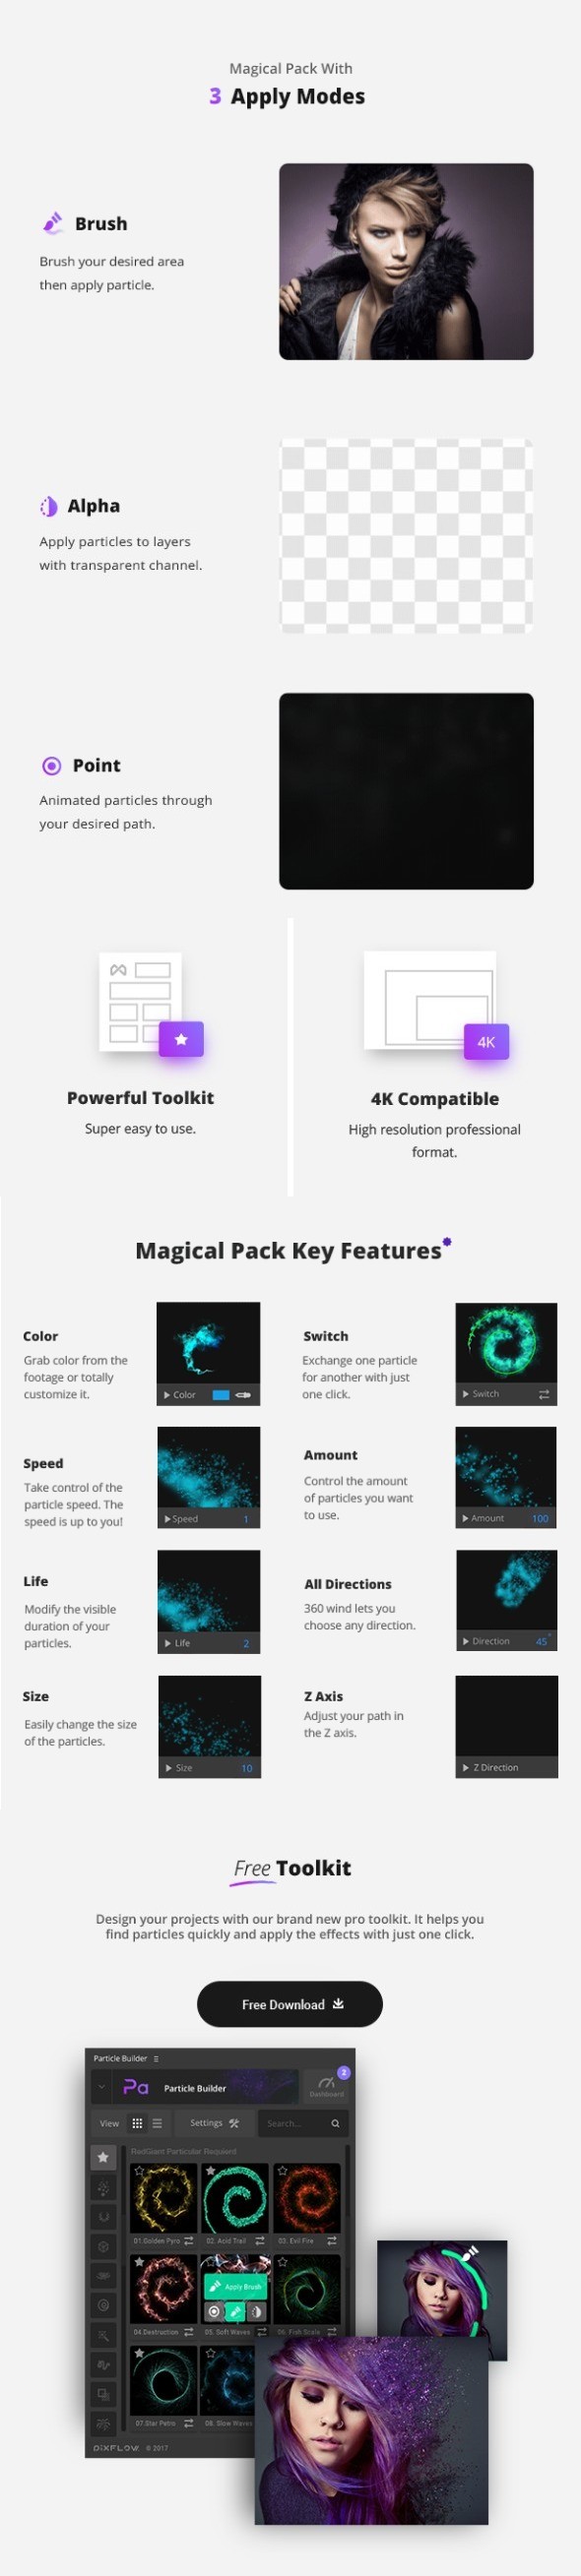 Videohive Particle Builder | Magical Pack: Magic Awards Abstract Particular Presets 20004075 - Free Addons